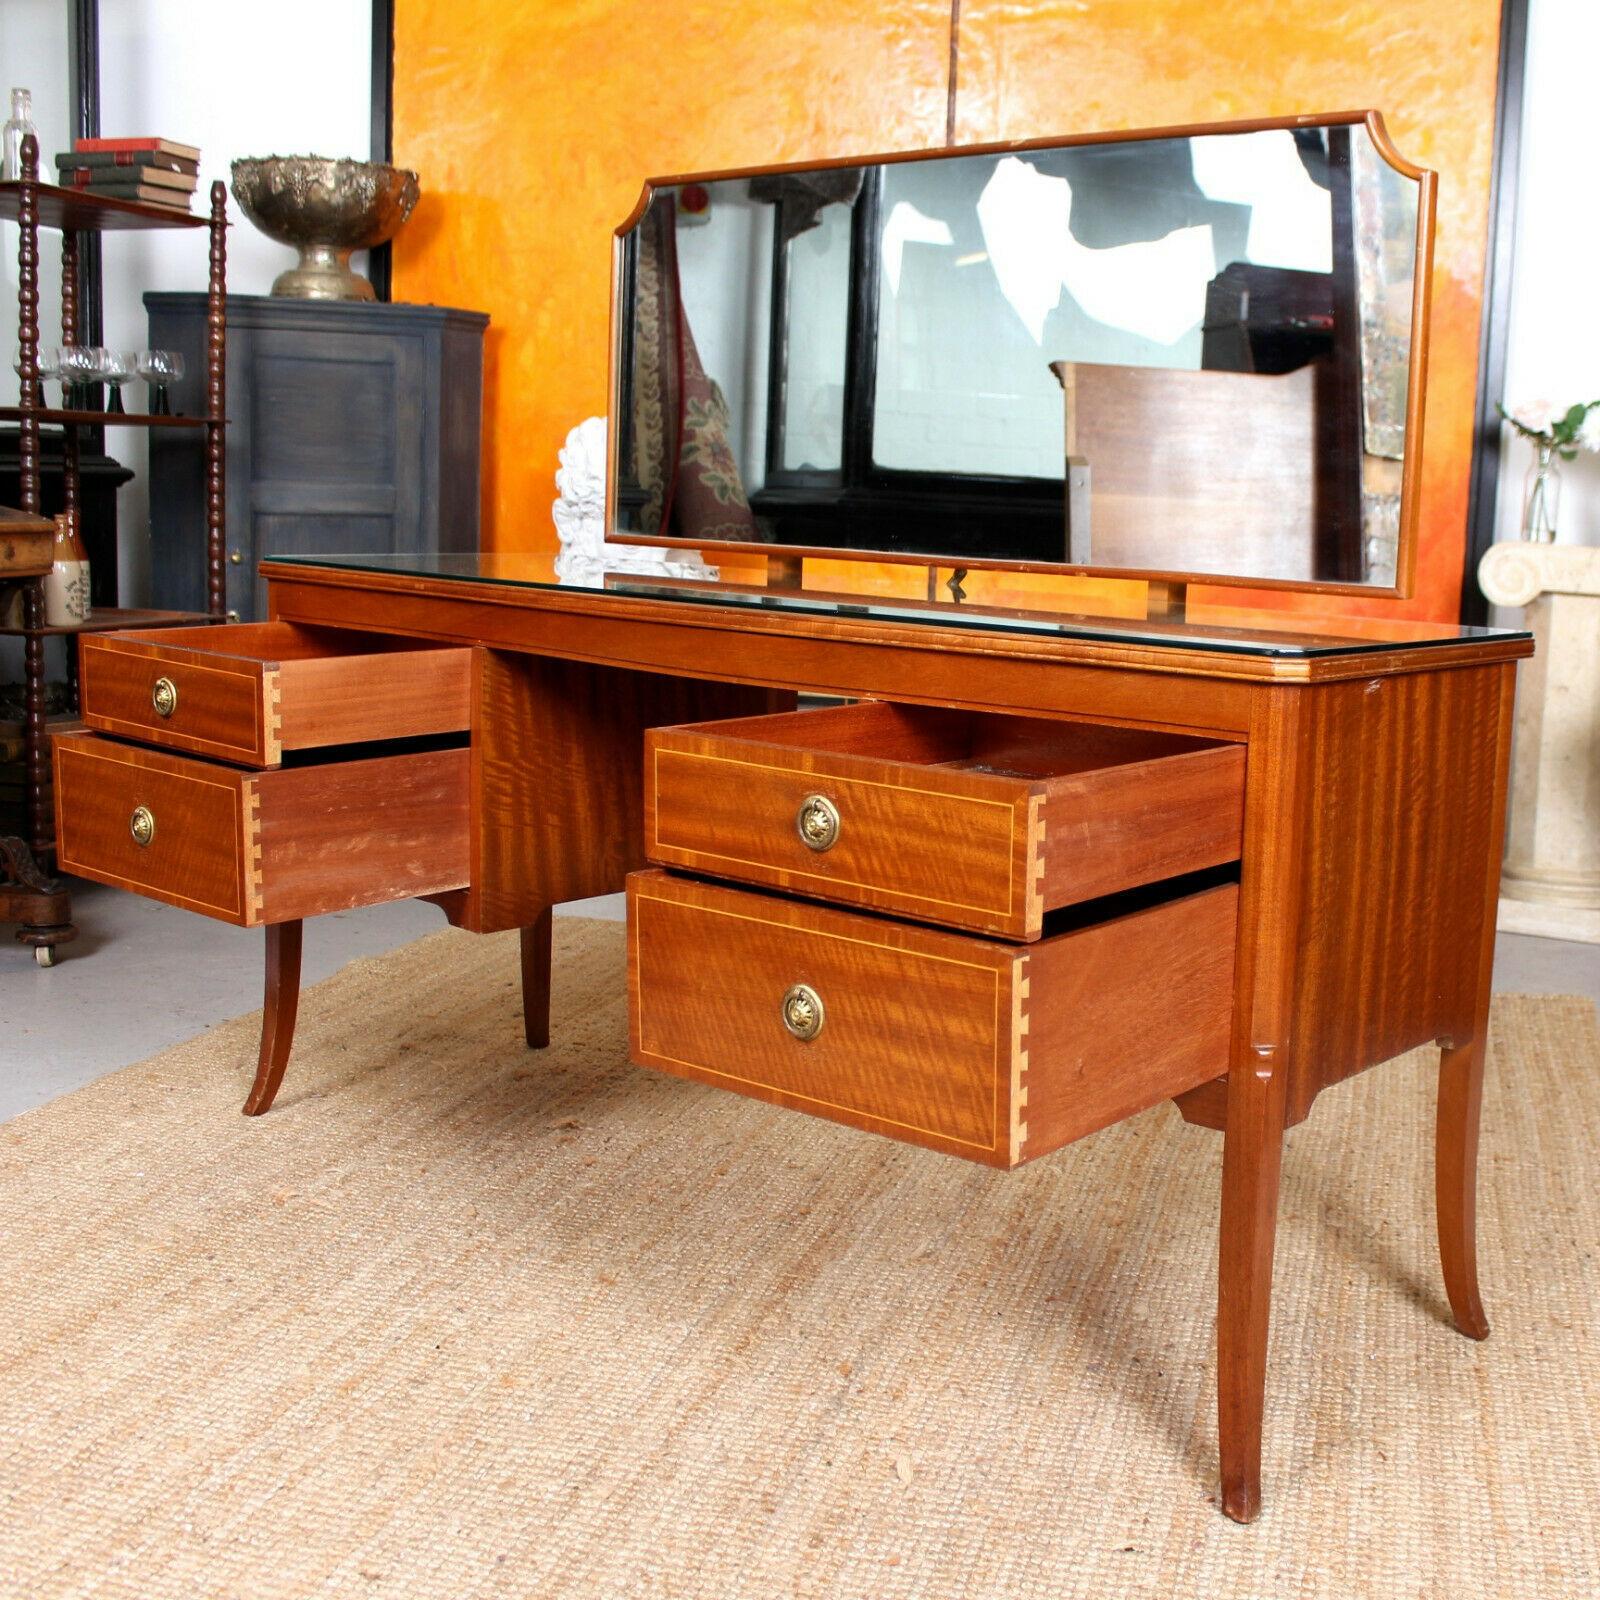 An impressive inlaid mahogany dressing table originally retailed by Maple & Co.

An adjustable mahogany framed mirror raised on supports. The inlaid top with canted corners and glass top. Fitted four drawers to the twin pedestals with inlaid